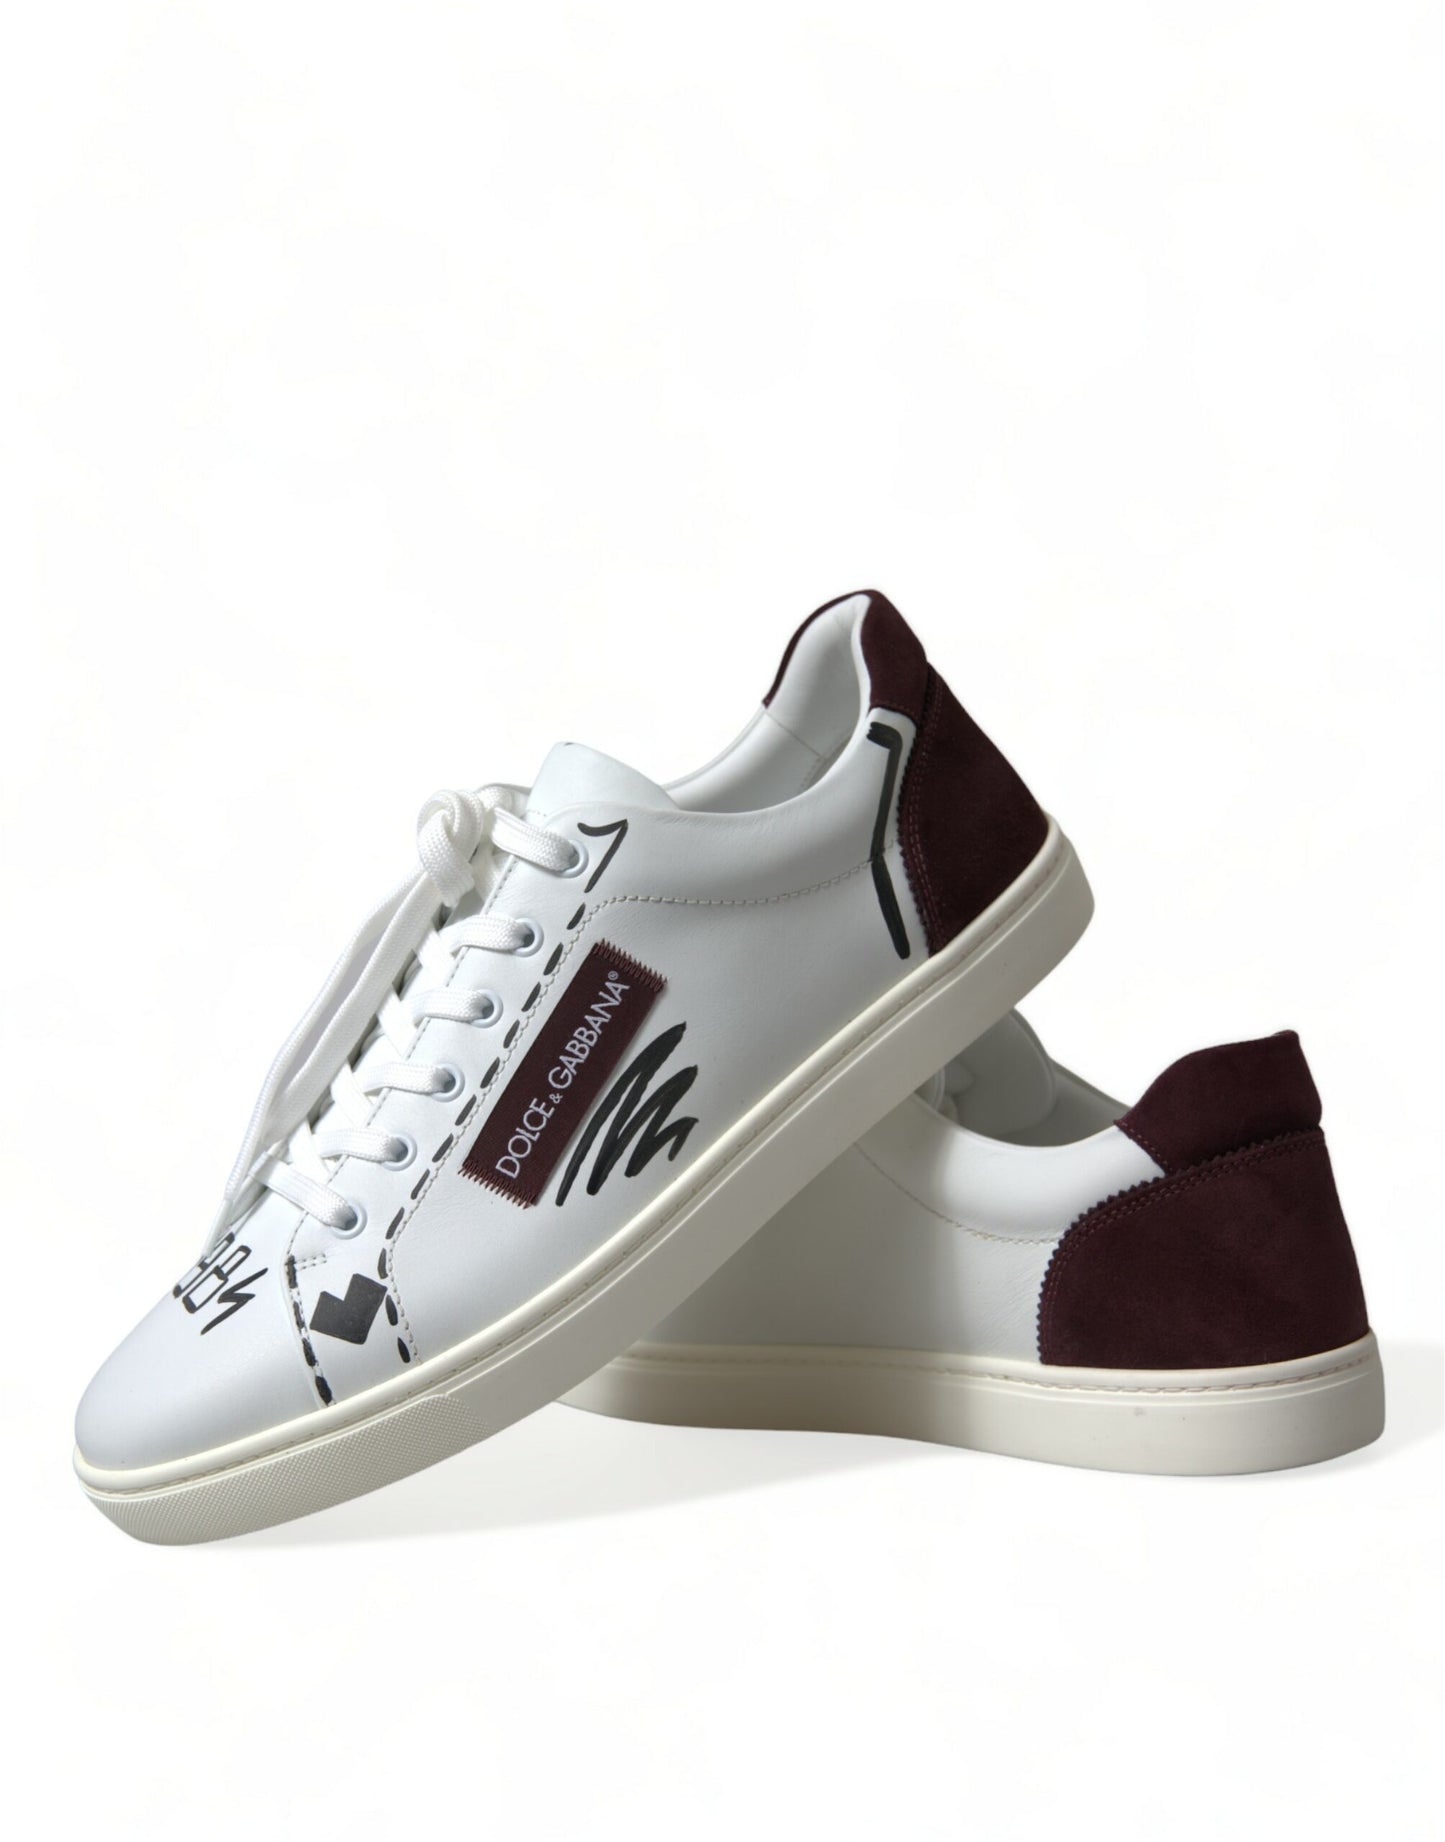 Dolce & Gabbana Exclusive White Bordeaux Low Top Sneakers